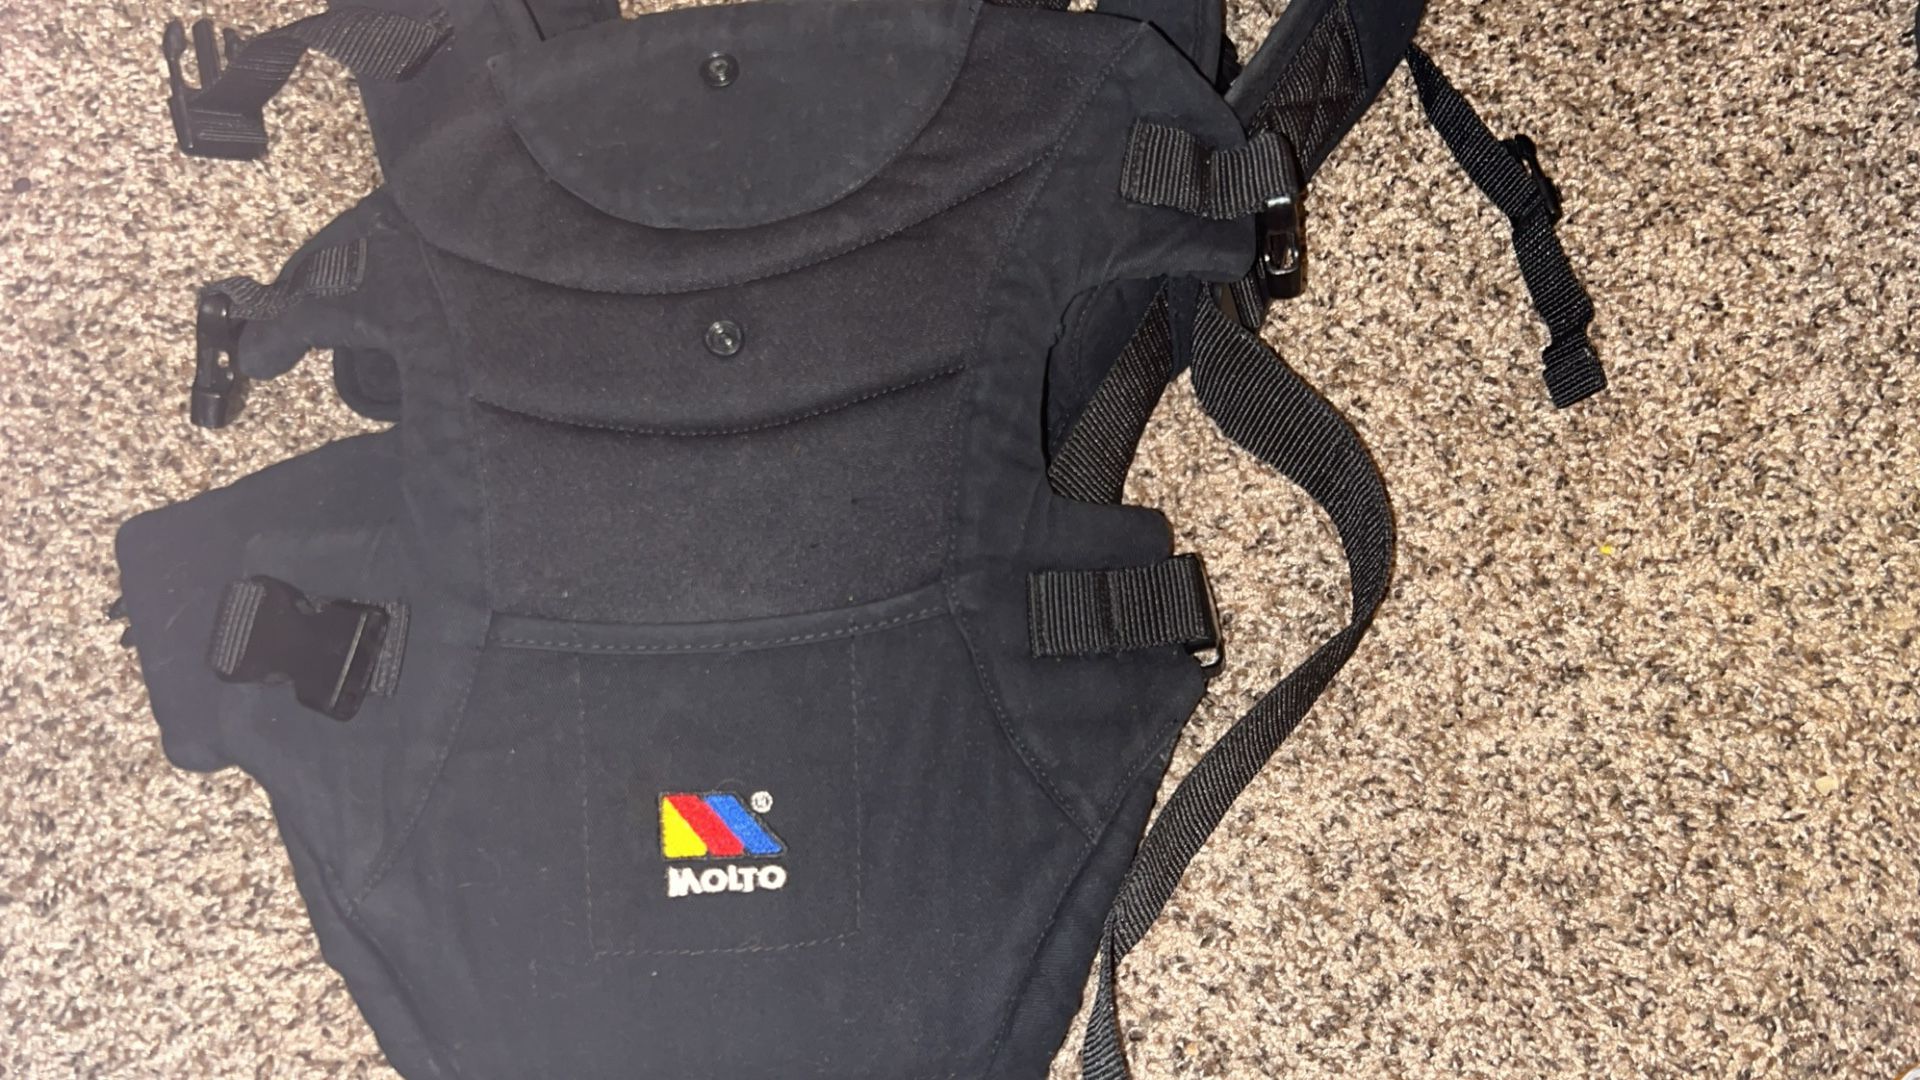 $10 Molto - Baby Carrier